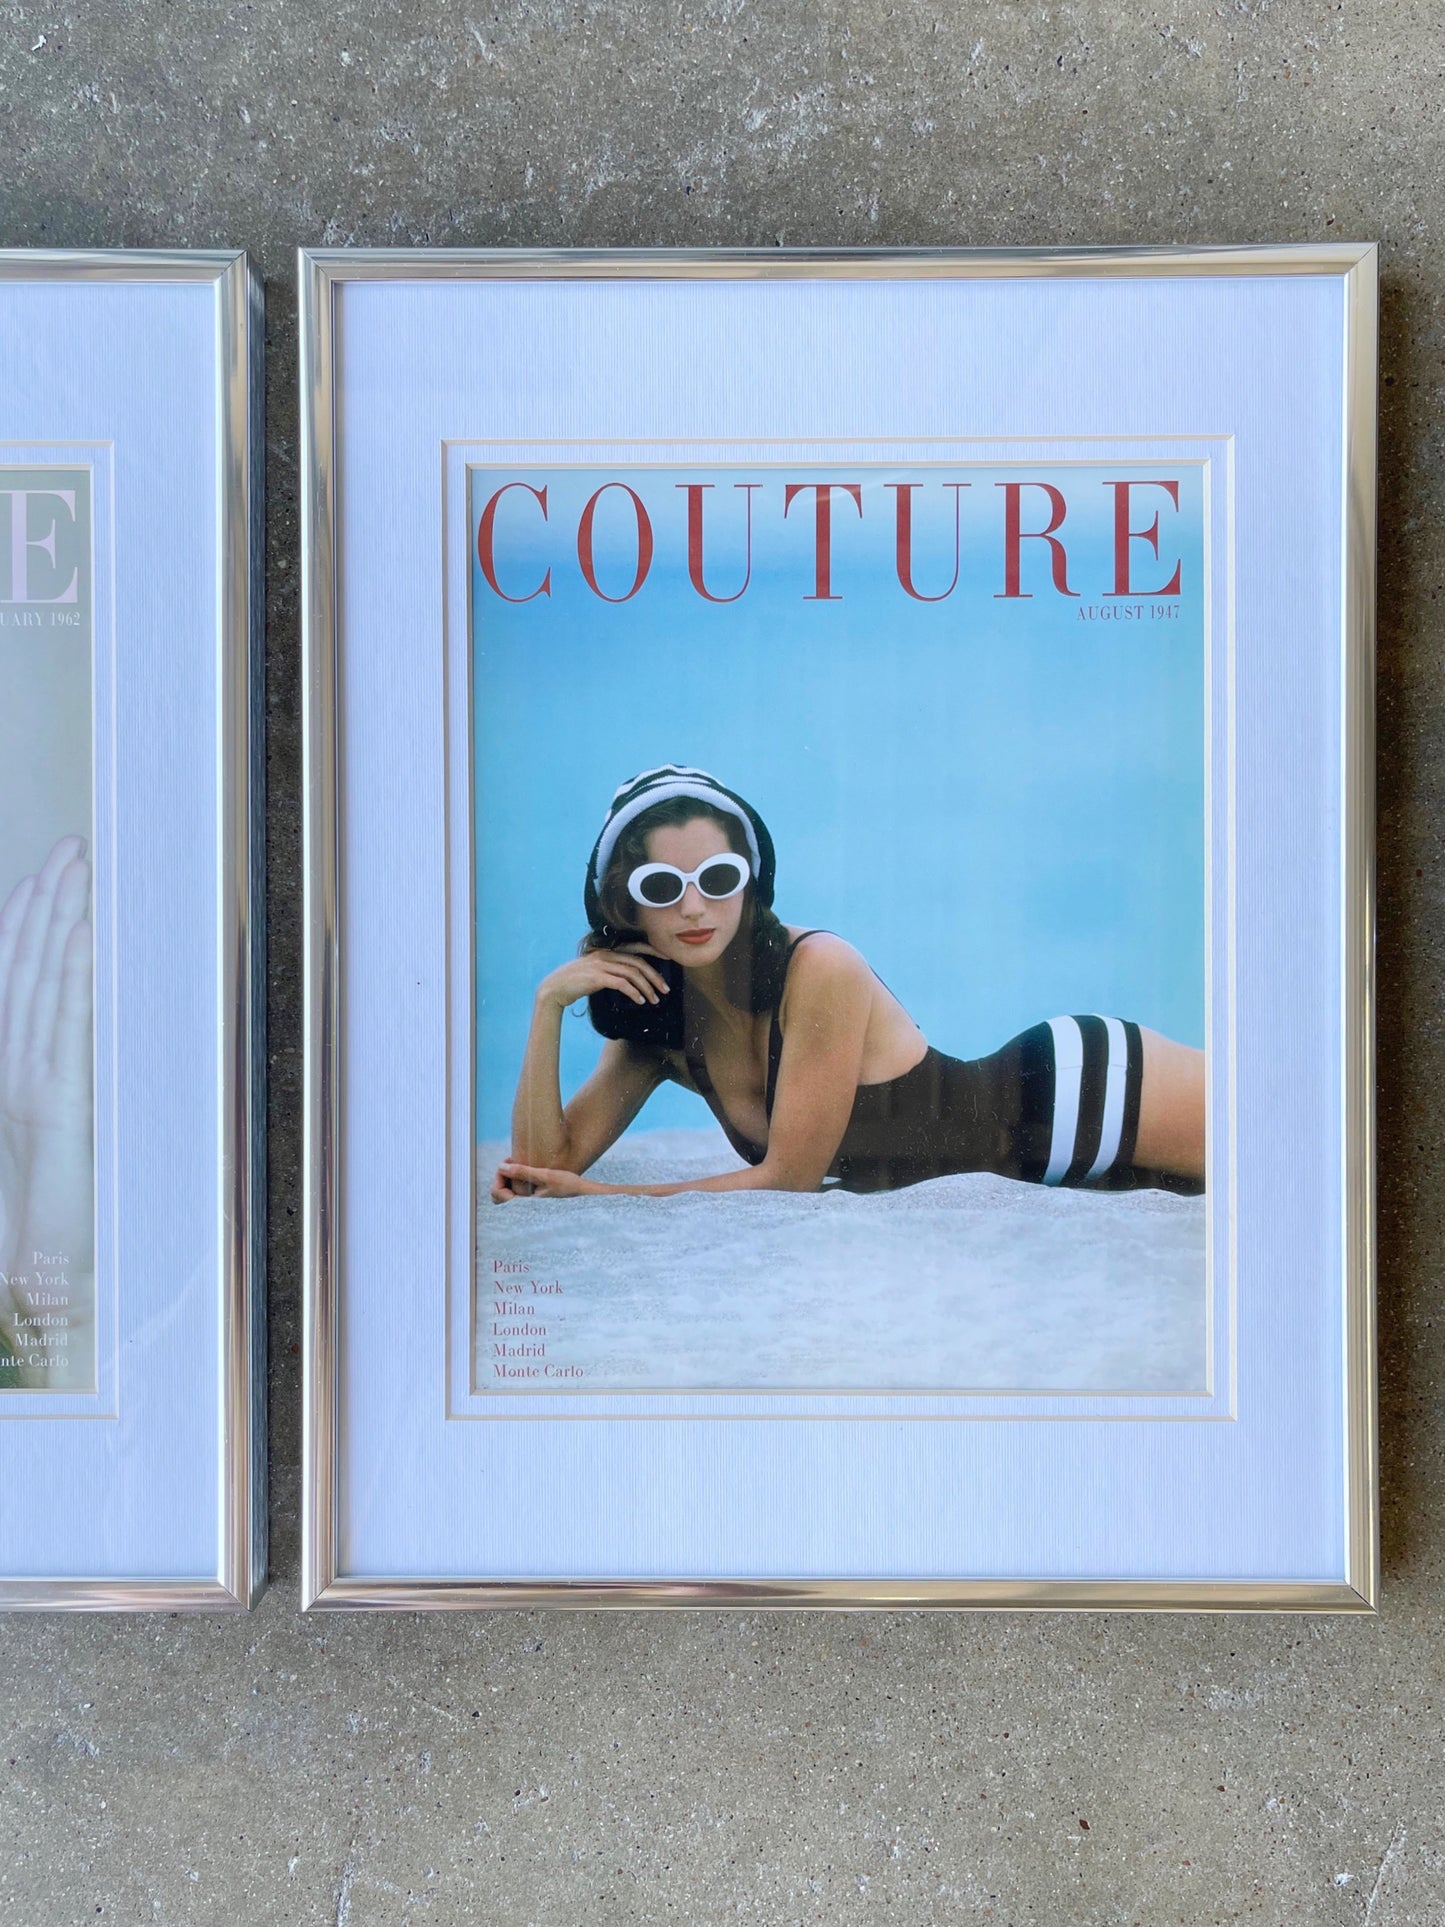 Vintage Framed Couture Magazine Covers - Set of 3